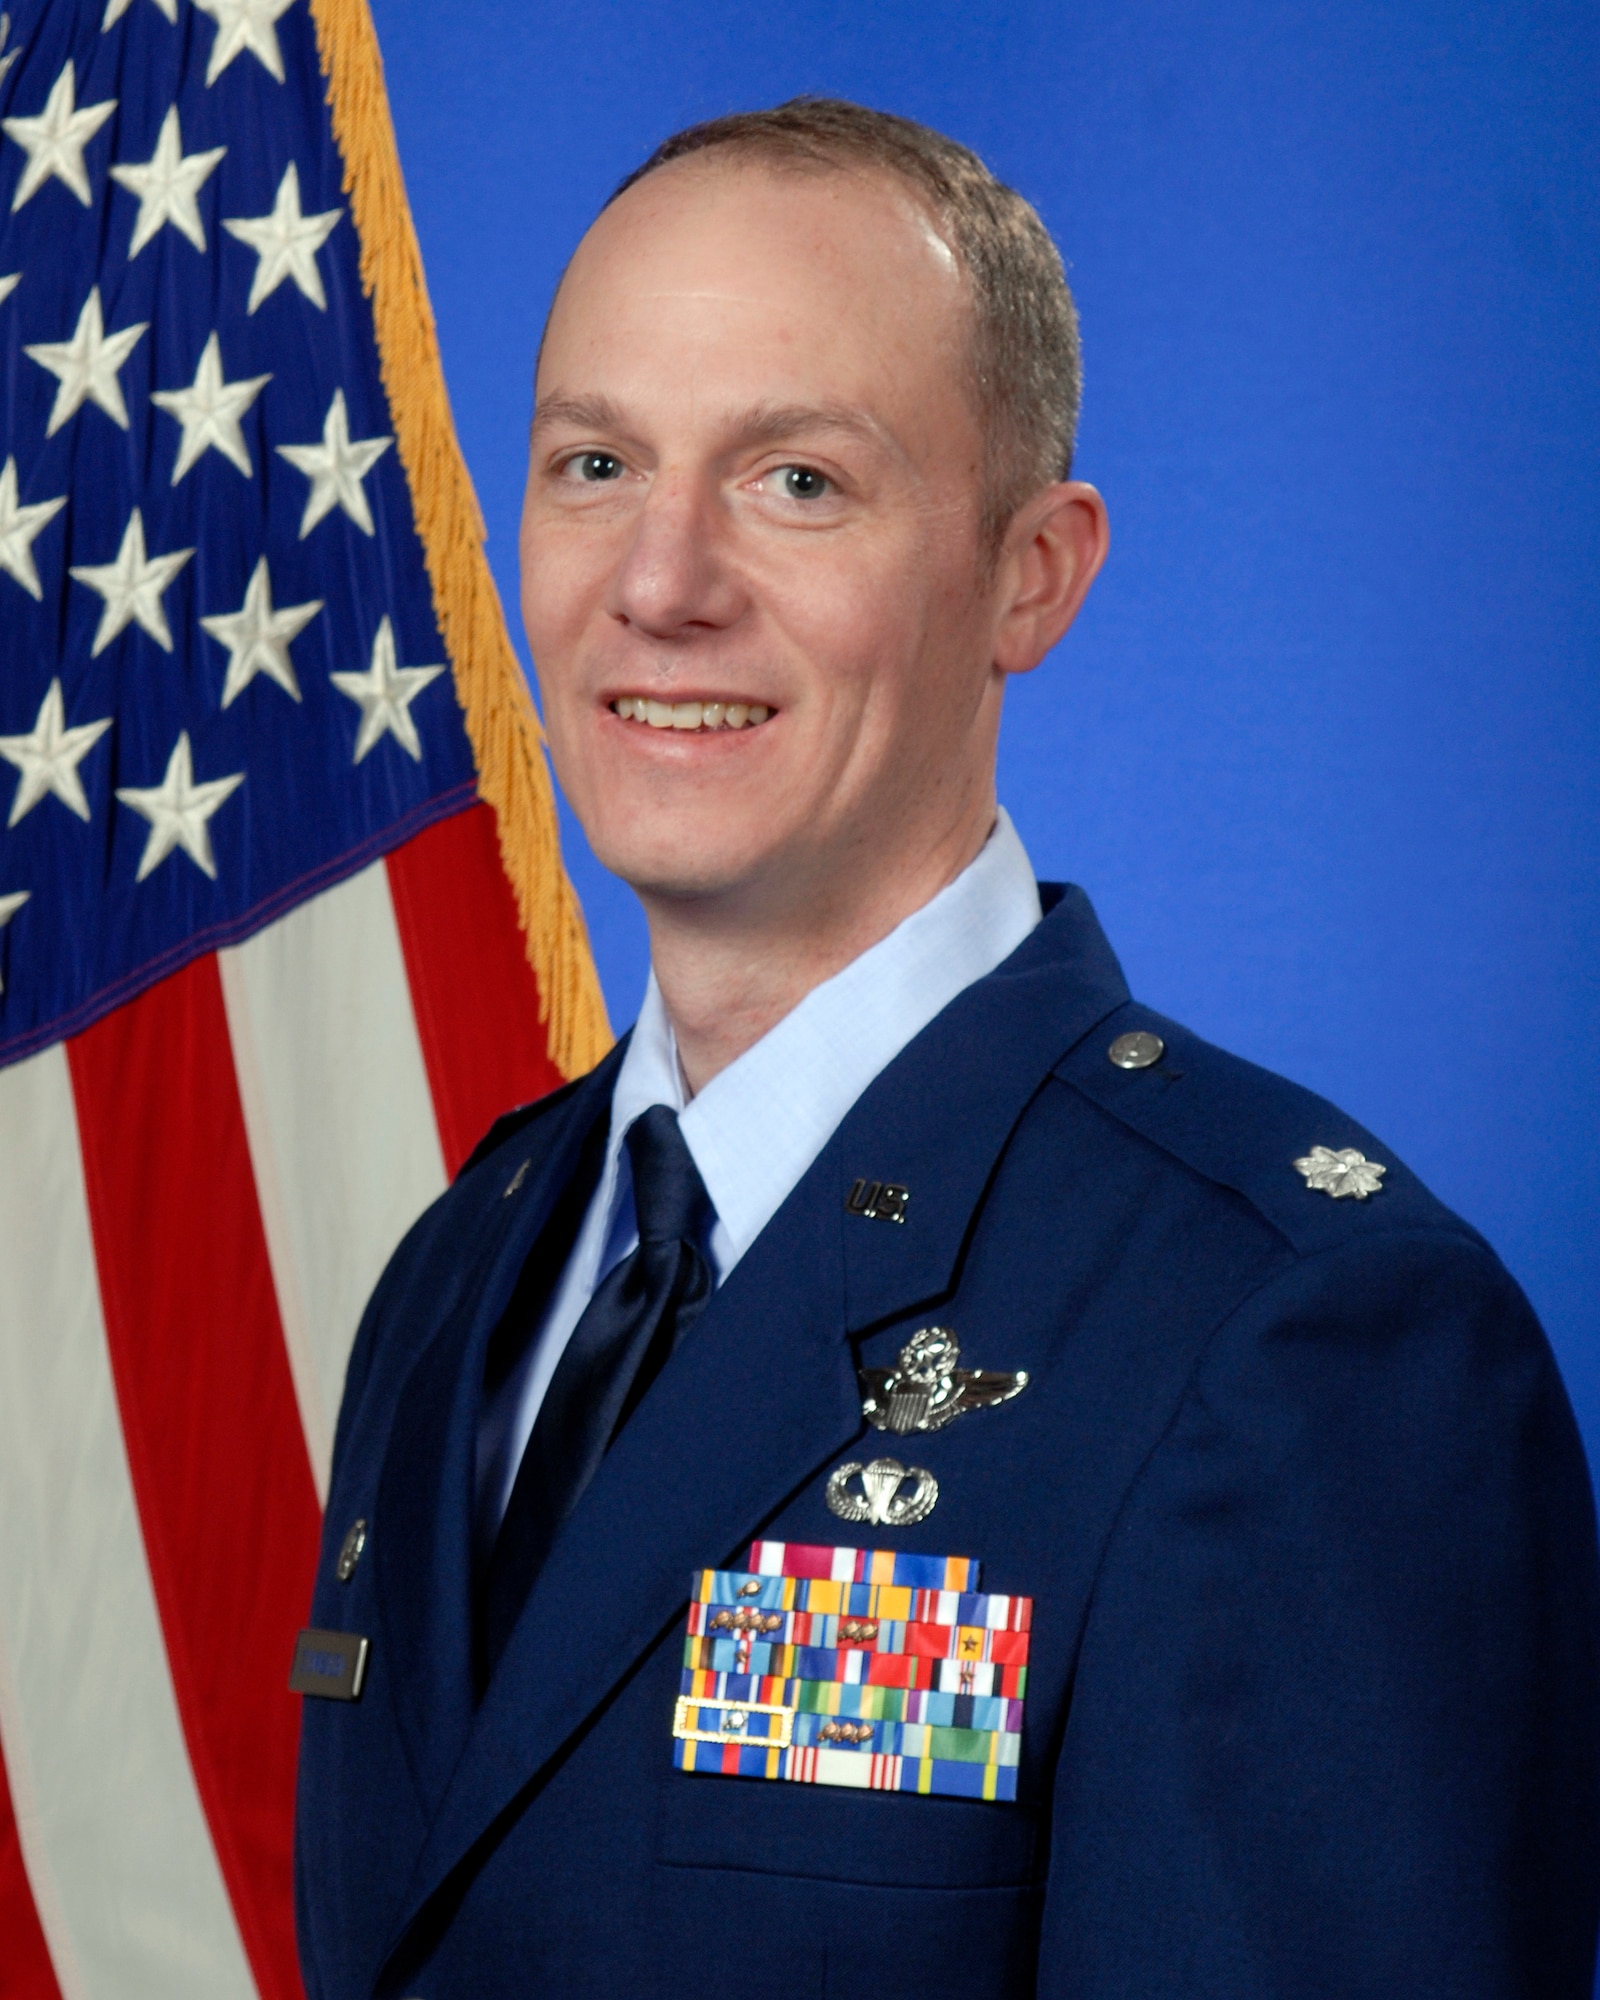 U.S. Air Force Lt. Col. Timothy D. Stumbaugh, then the commander of the 182nd Operations Support Squadron, is pictured in Peoria, Ill., Feb. 2, 2013. Stumbaugh was selected to become the 182nd Airlift Wing’s new vice commander Nov. 6, 2014. Stumbaugh is an U.S. Air Force Academy graduate with more than 10,000 hours flying military and civilian aircraft. (U.S. Air National Guard photo by SSgt Lealan Buehrer/Released)